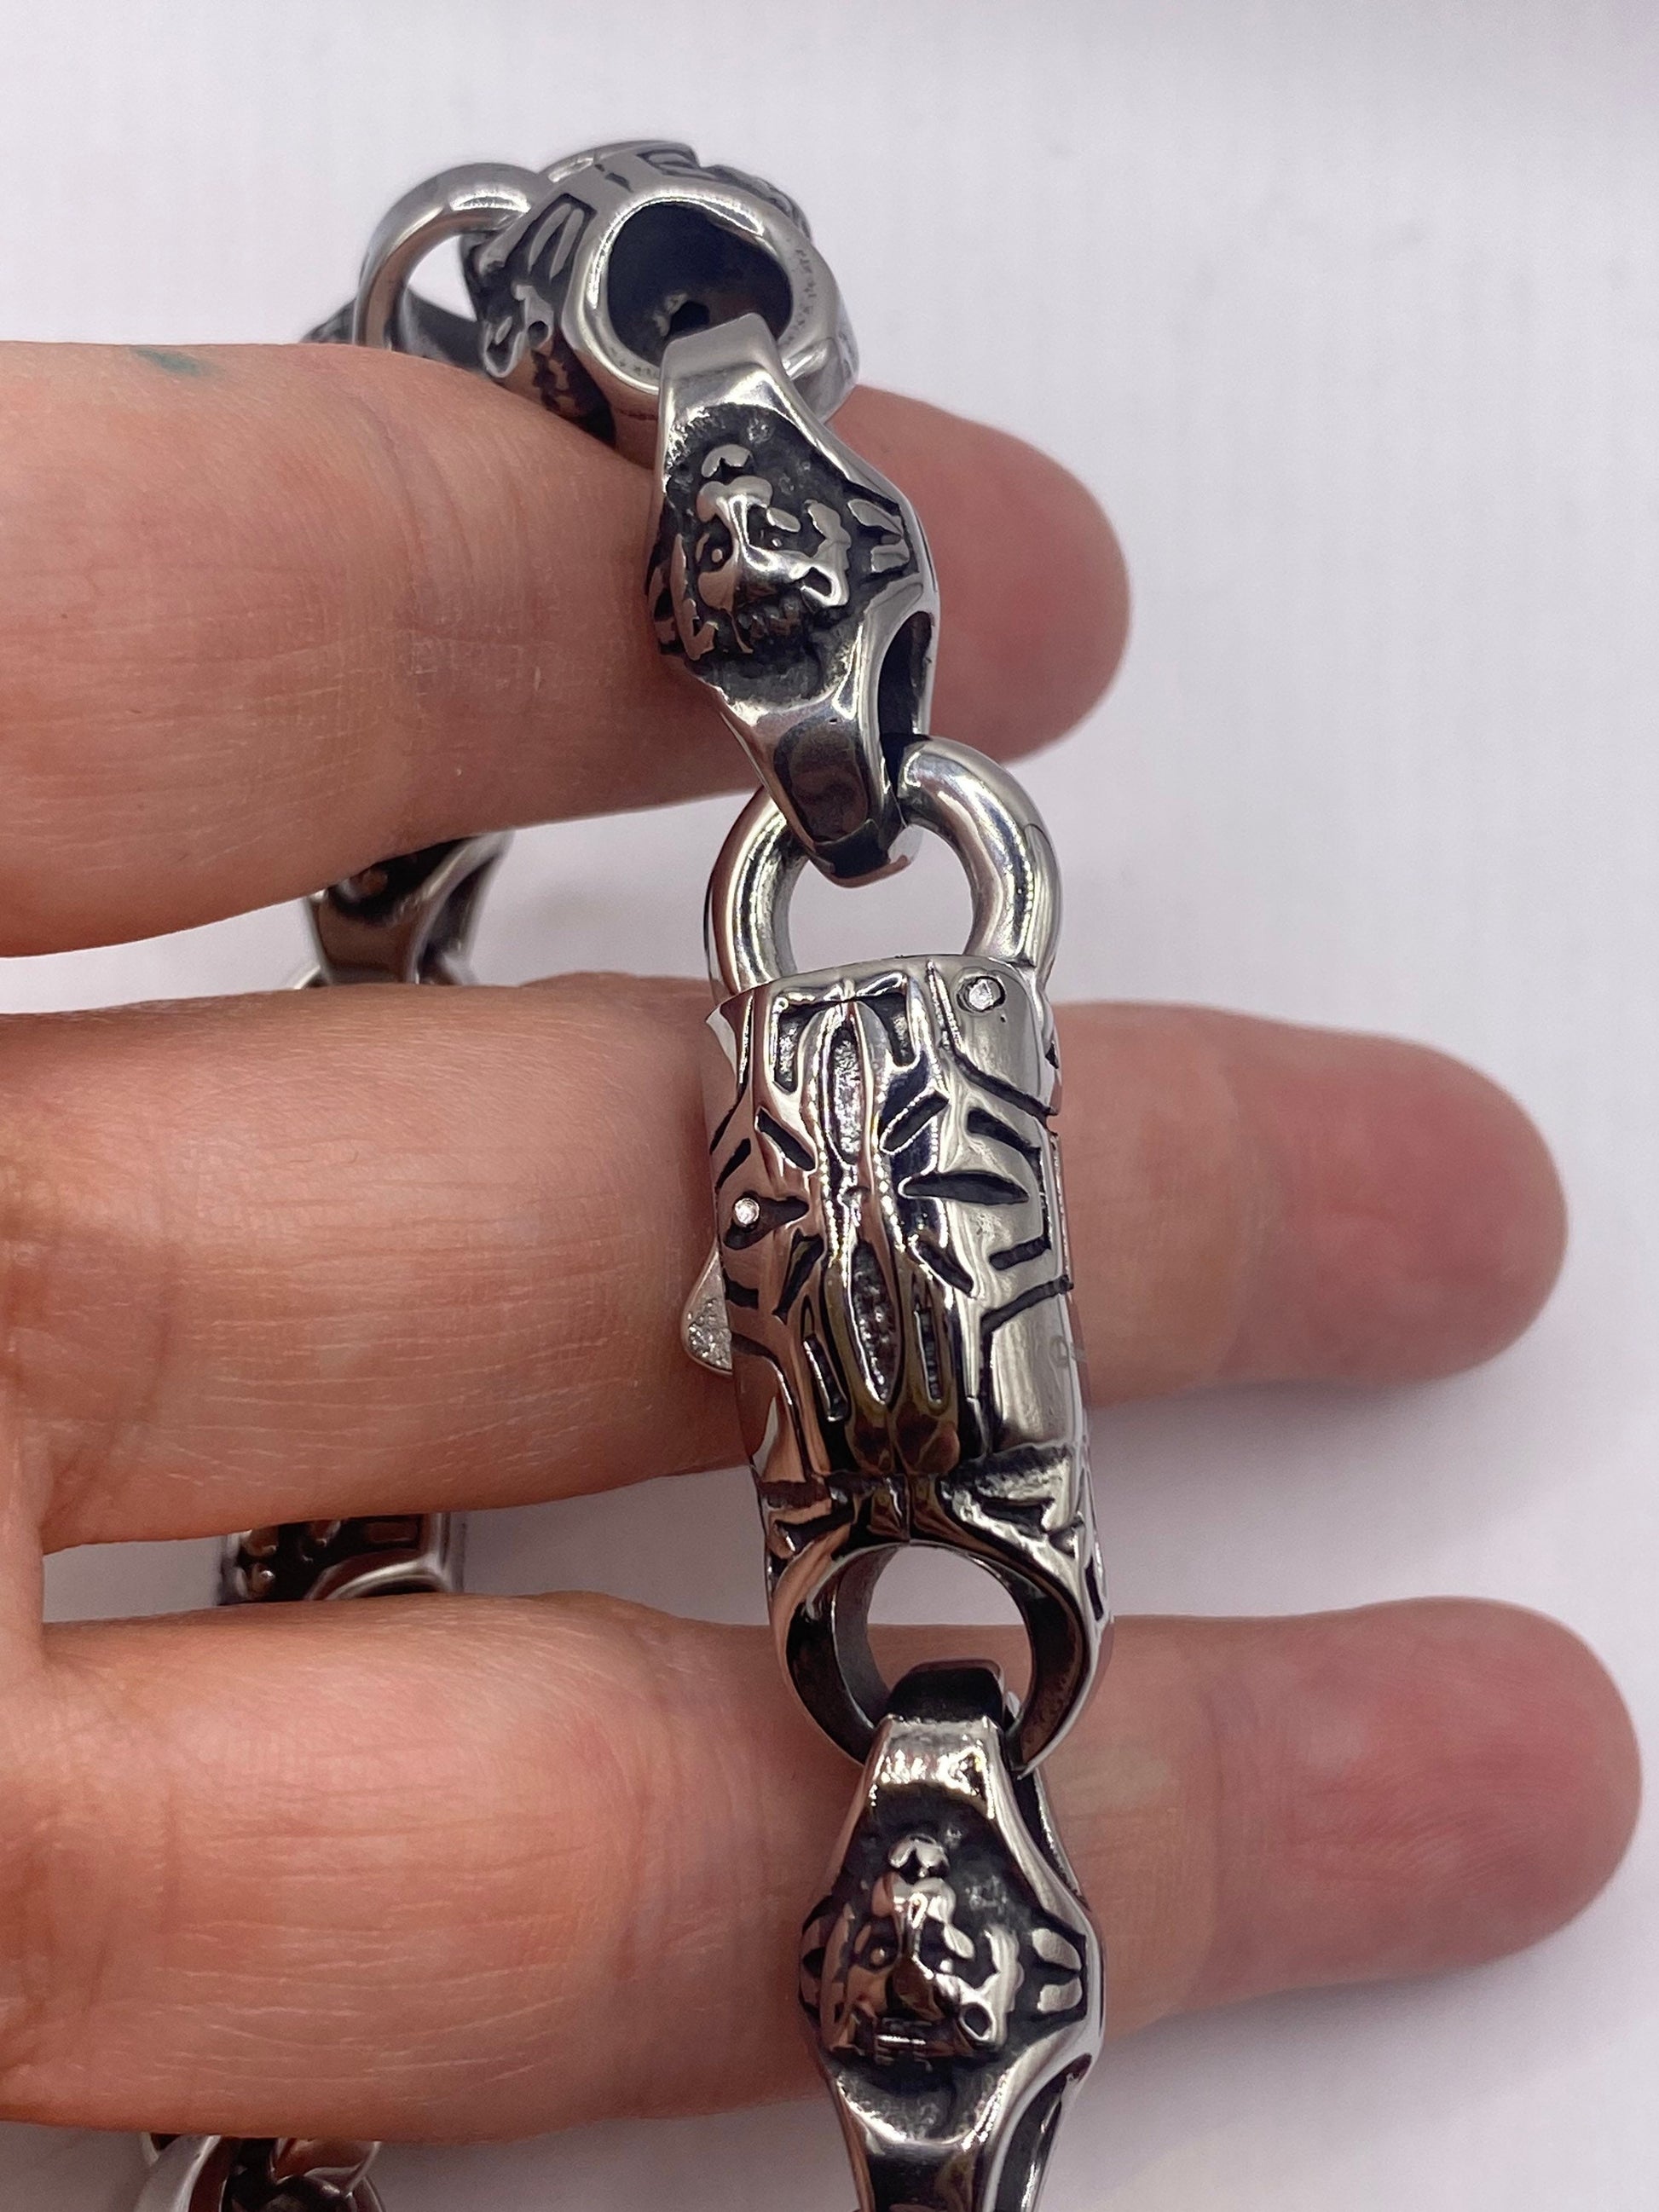 Vintage Style 9 inch Stainless Steel Lion Bracelet